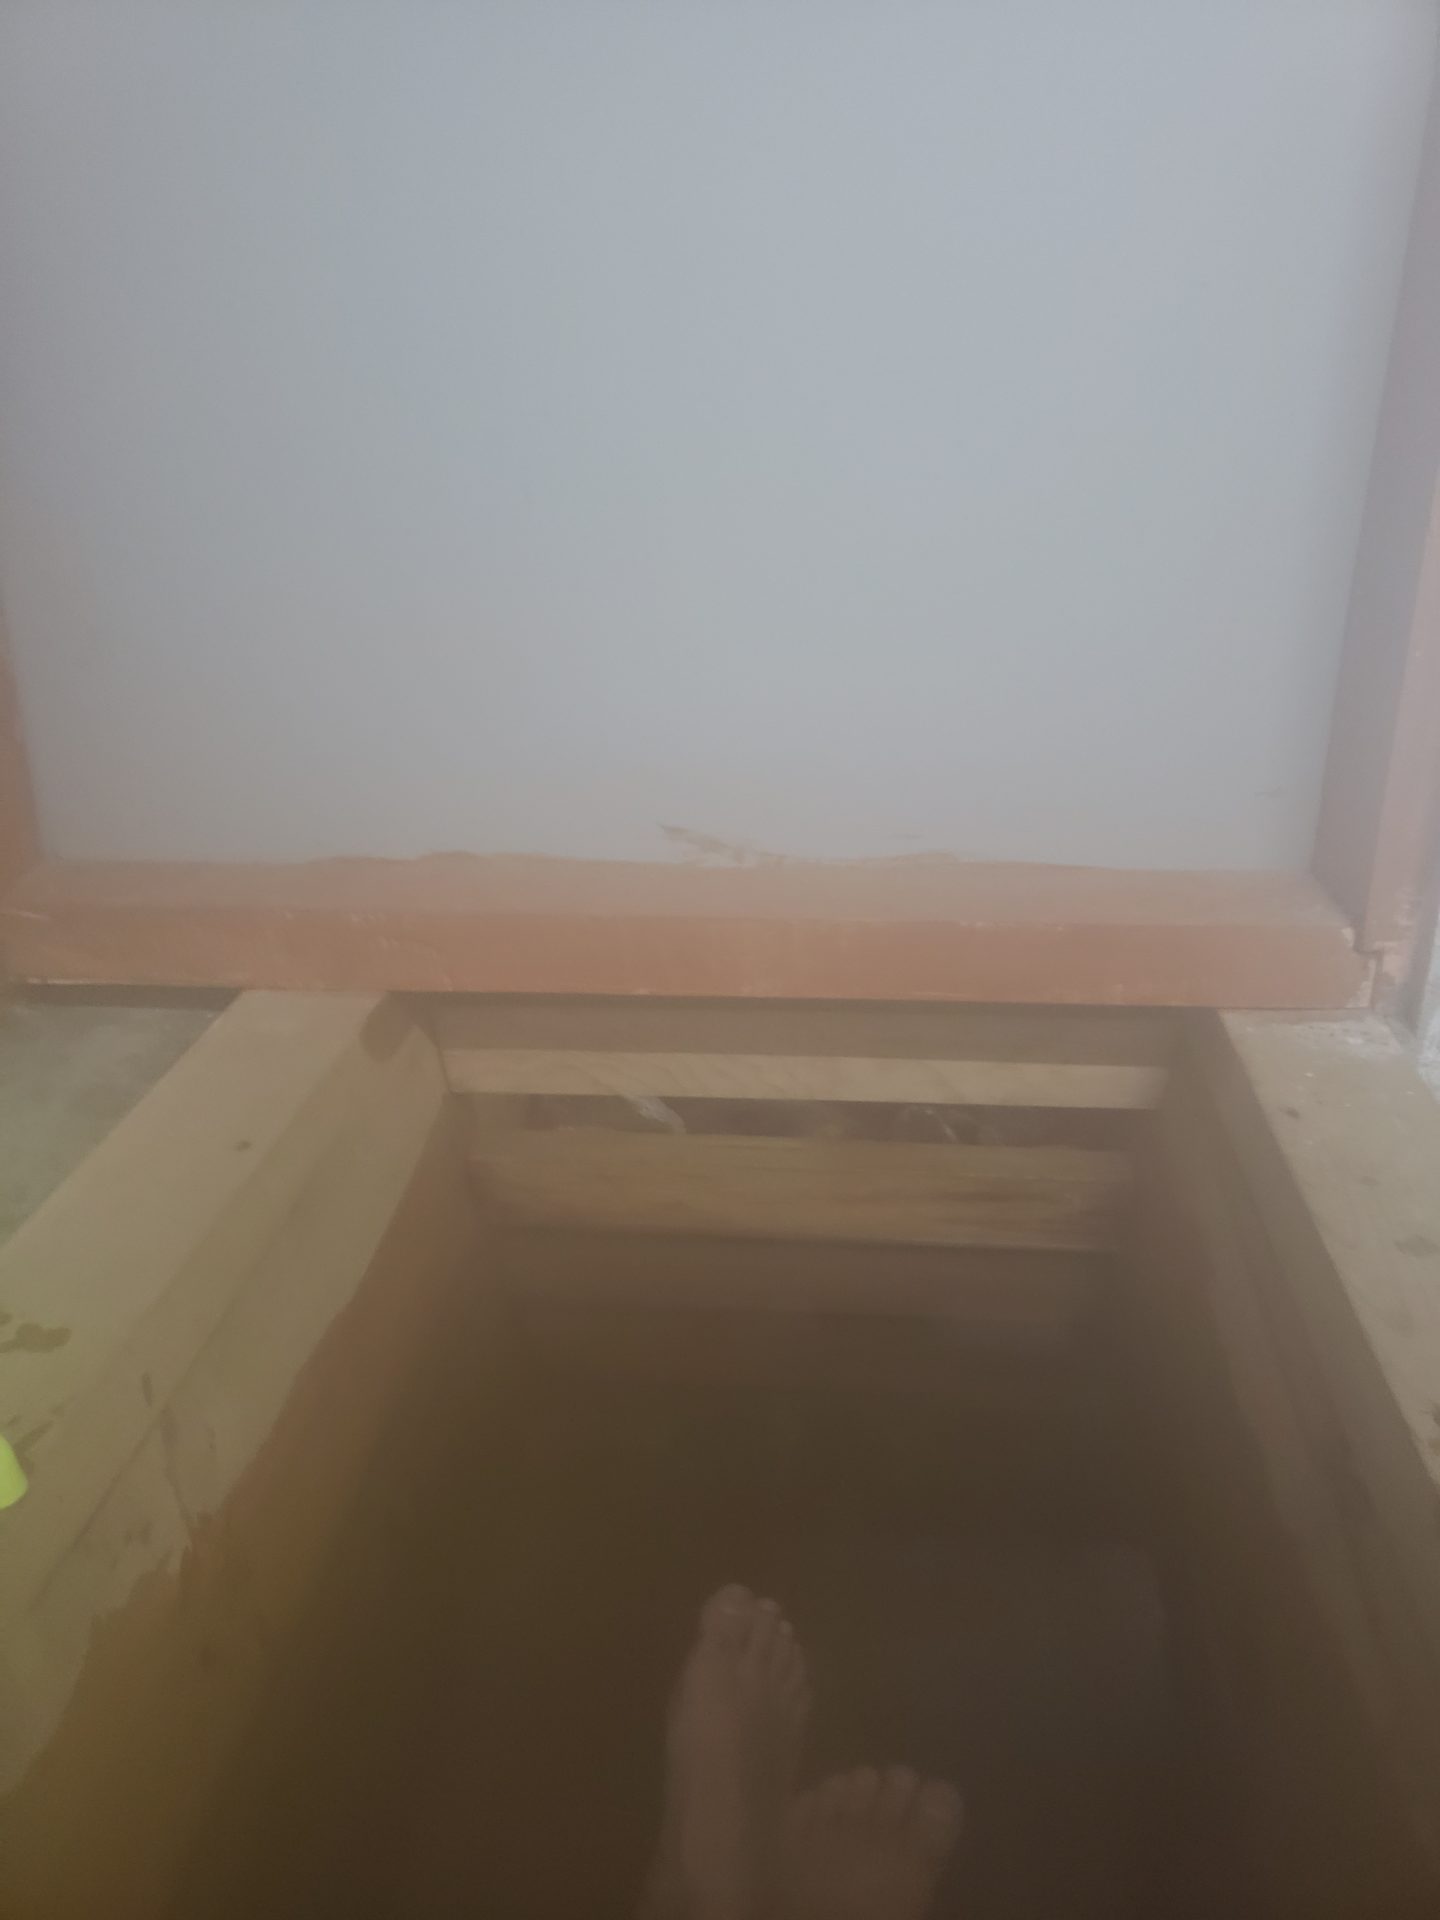 a person standing in a hole in a room